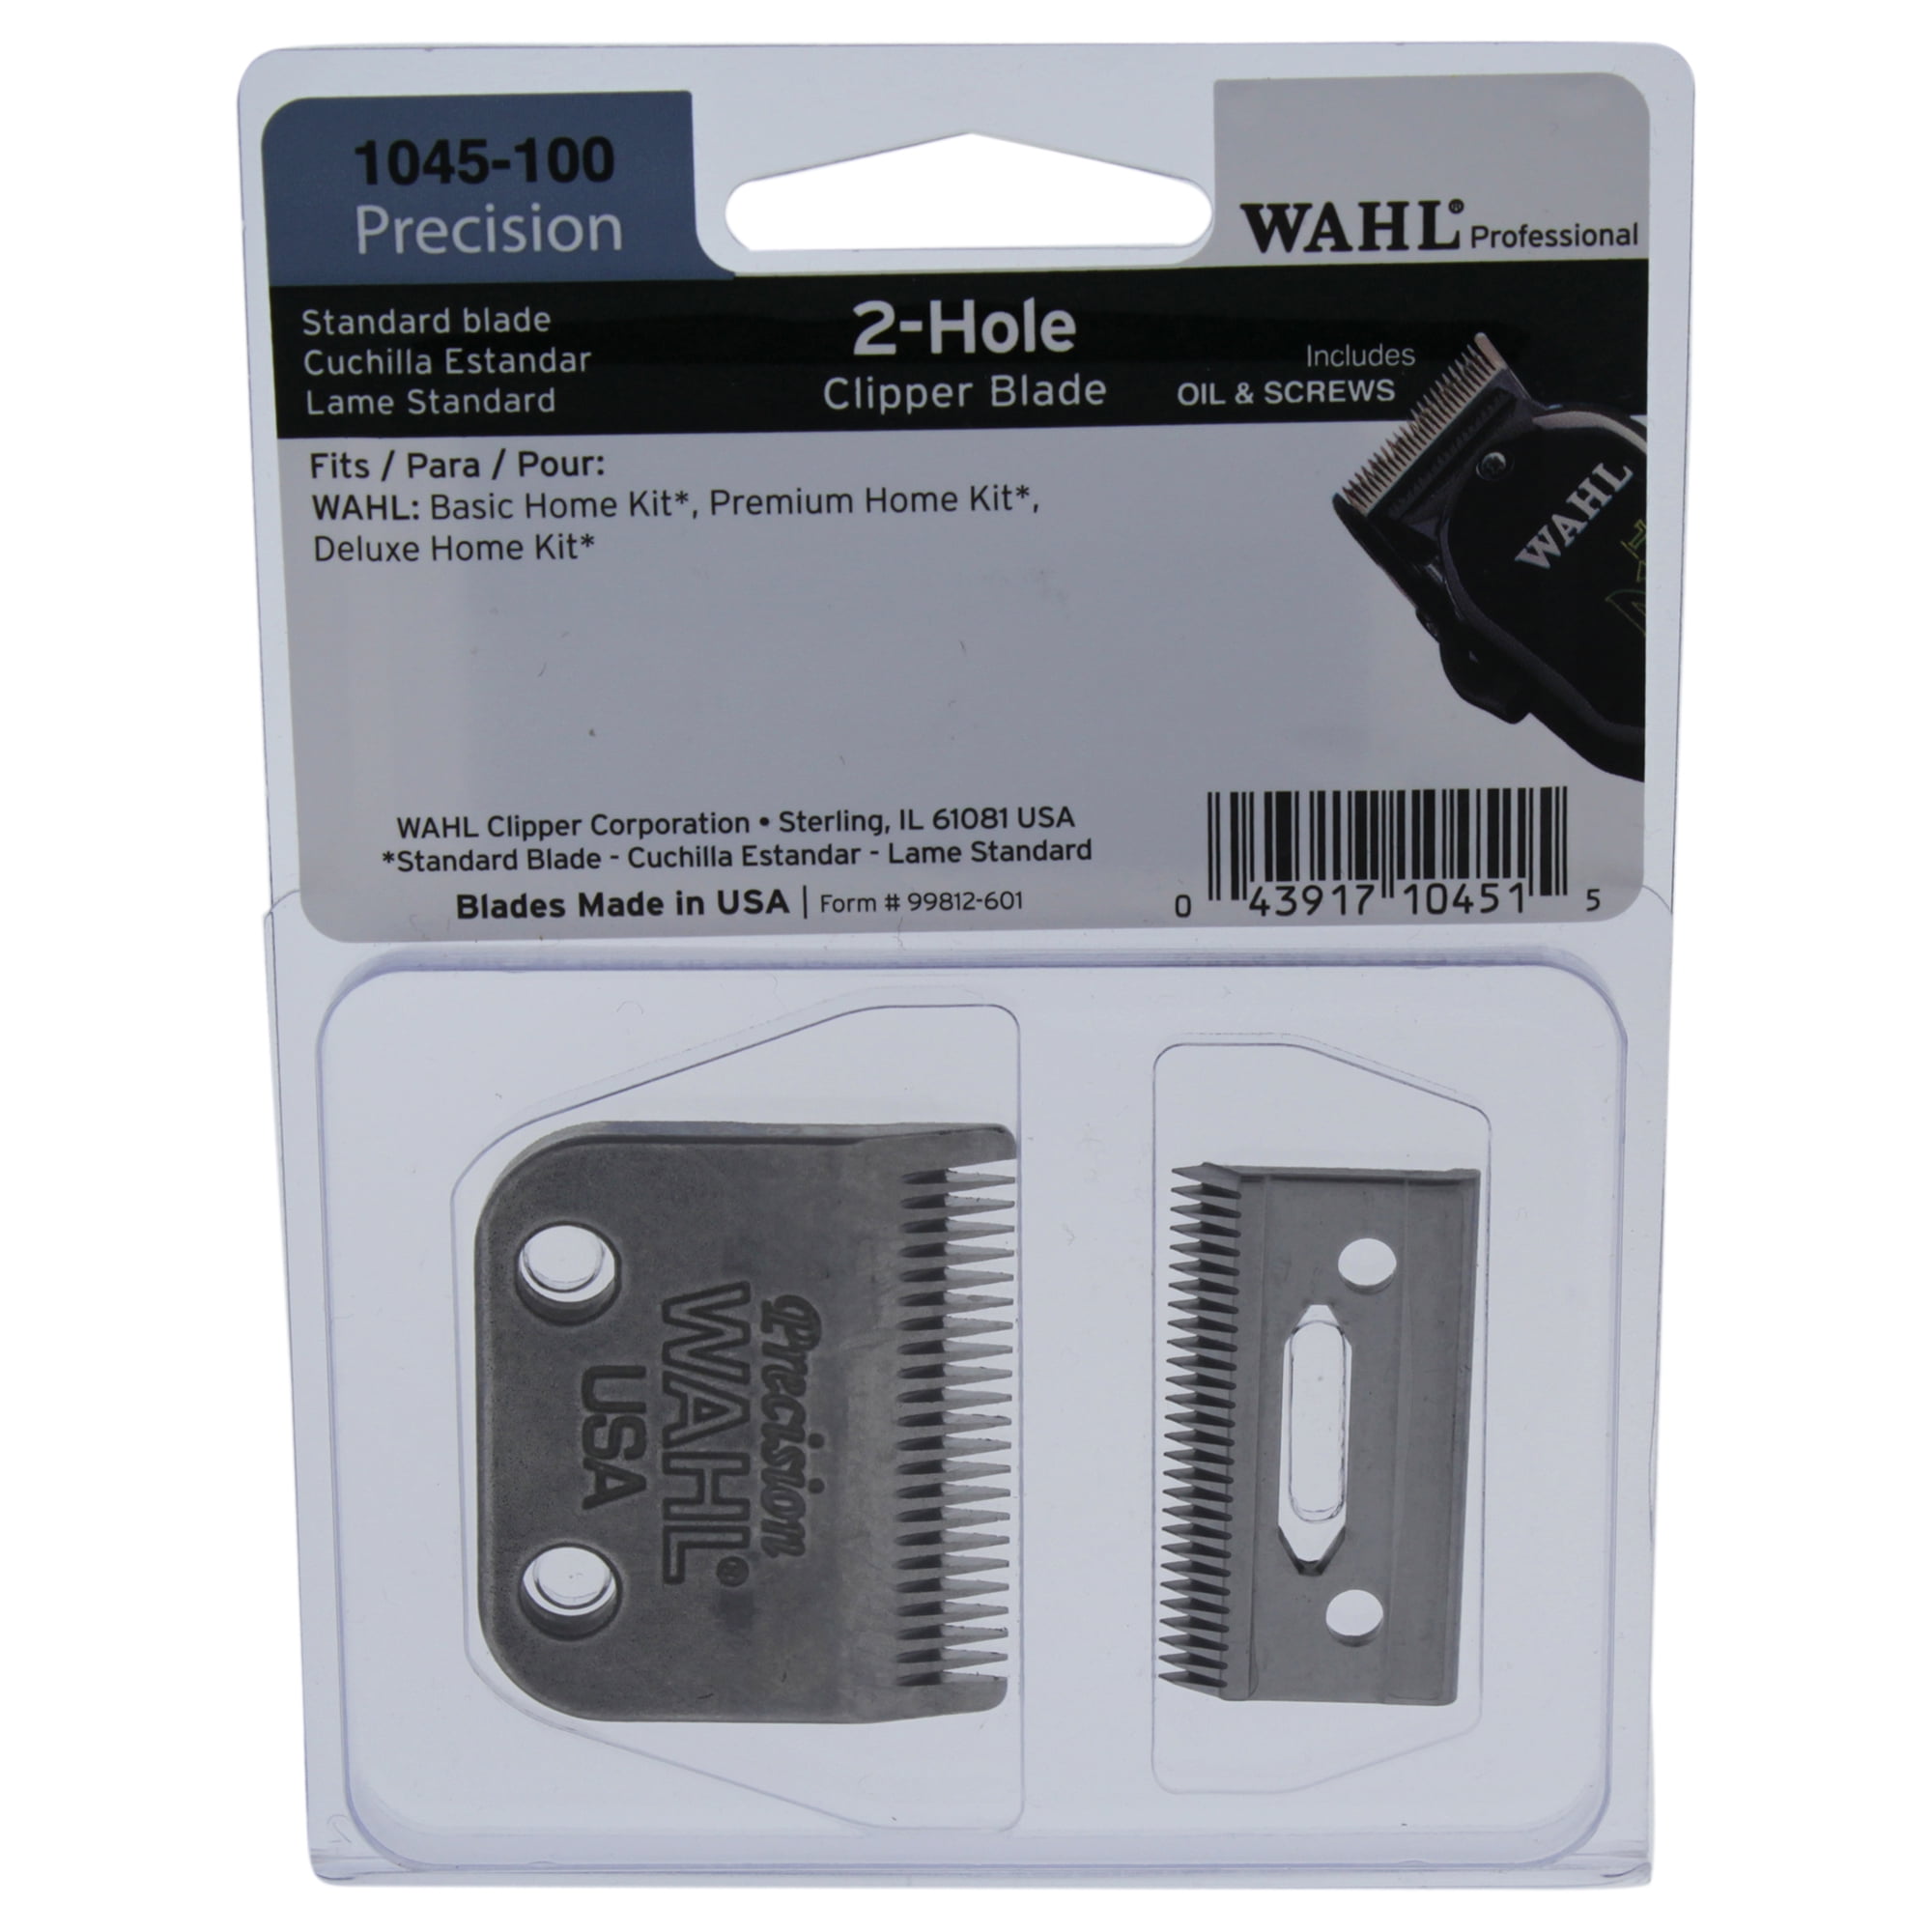 wahl precision clippers